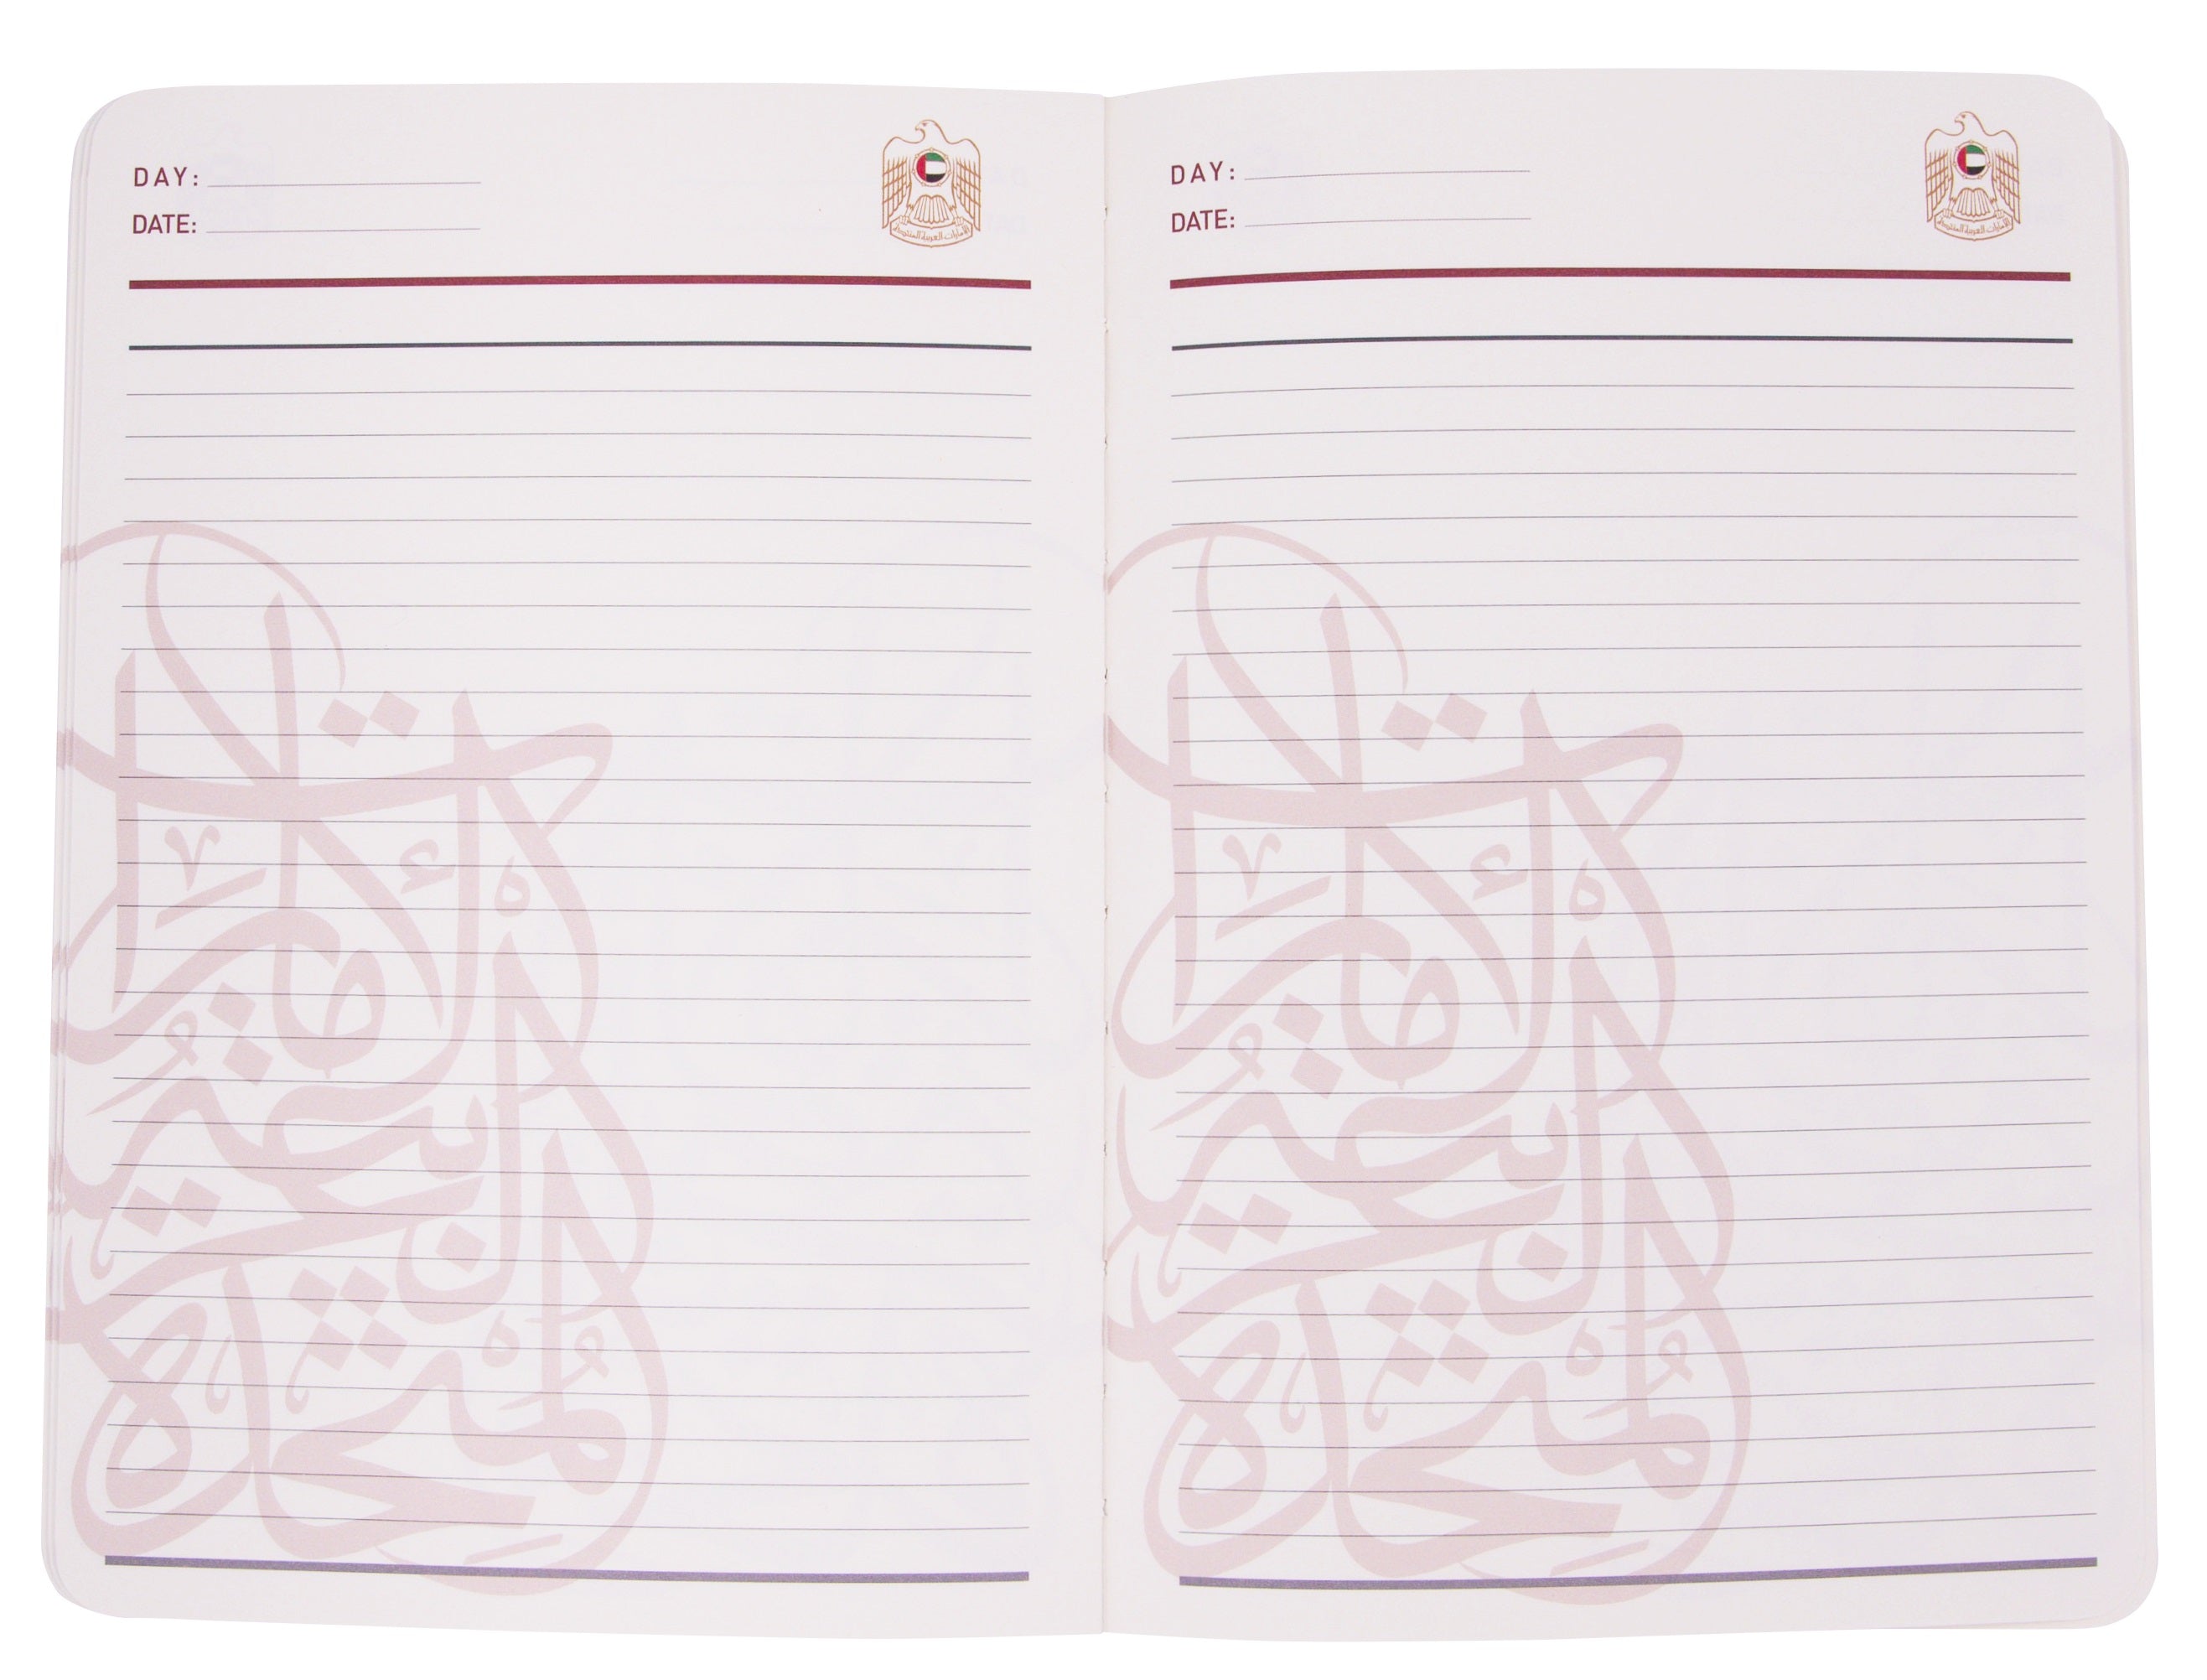 Rovatti Inner UAE Notebook Black | gifts and stationery | best gifts for men & women